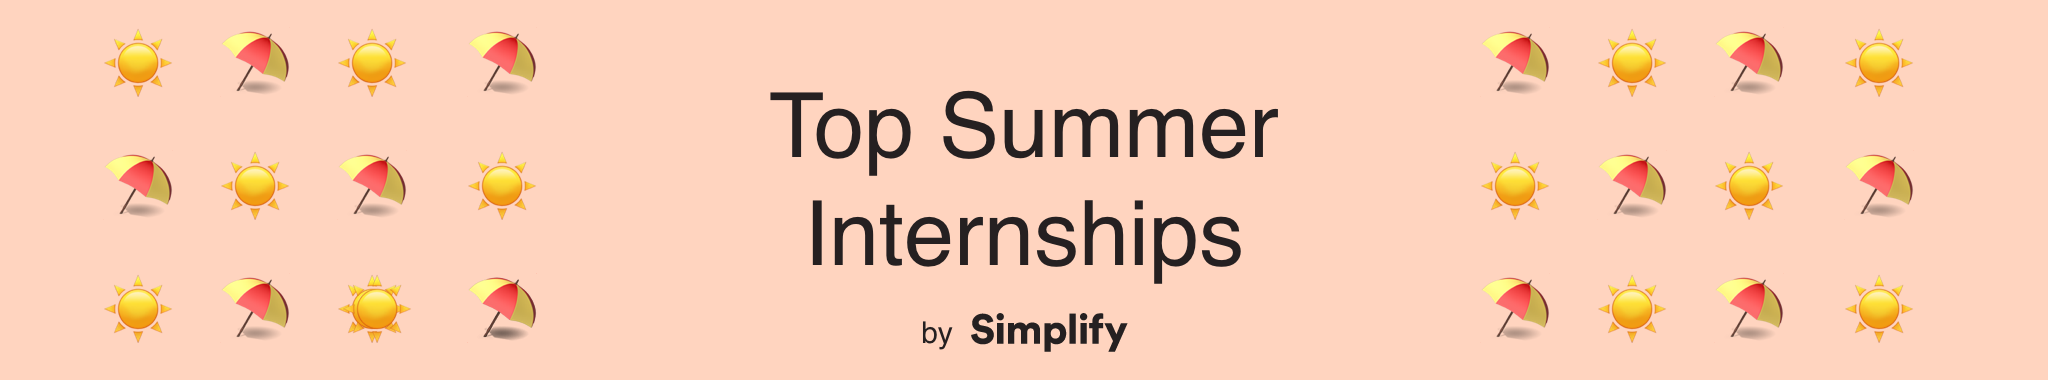 text that says “Top Summer Internships by Simplify” surrounded by sun and beach umbrella emojis